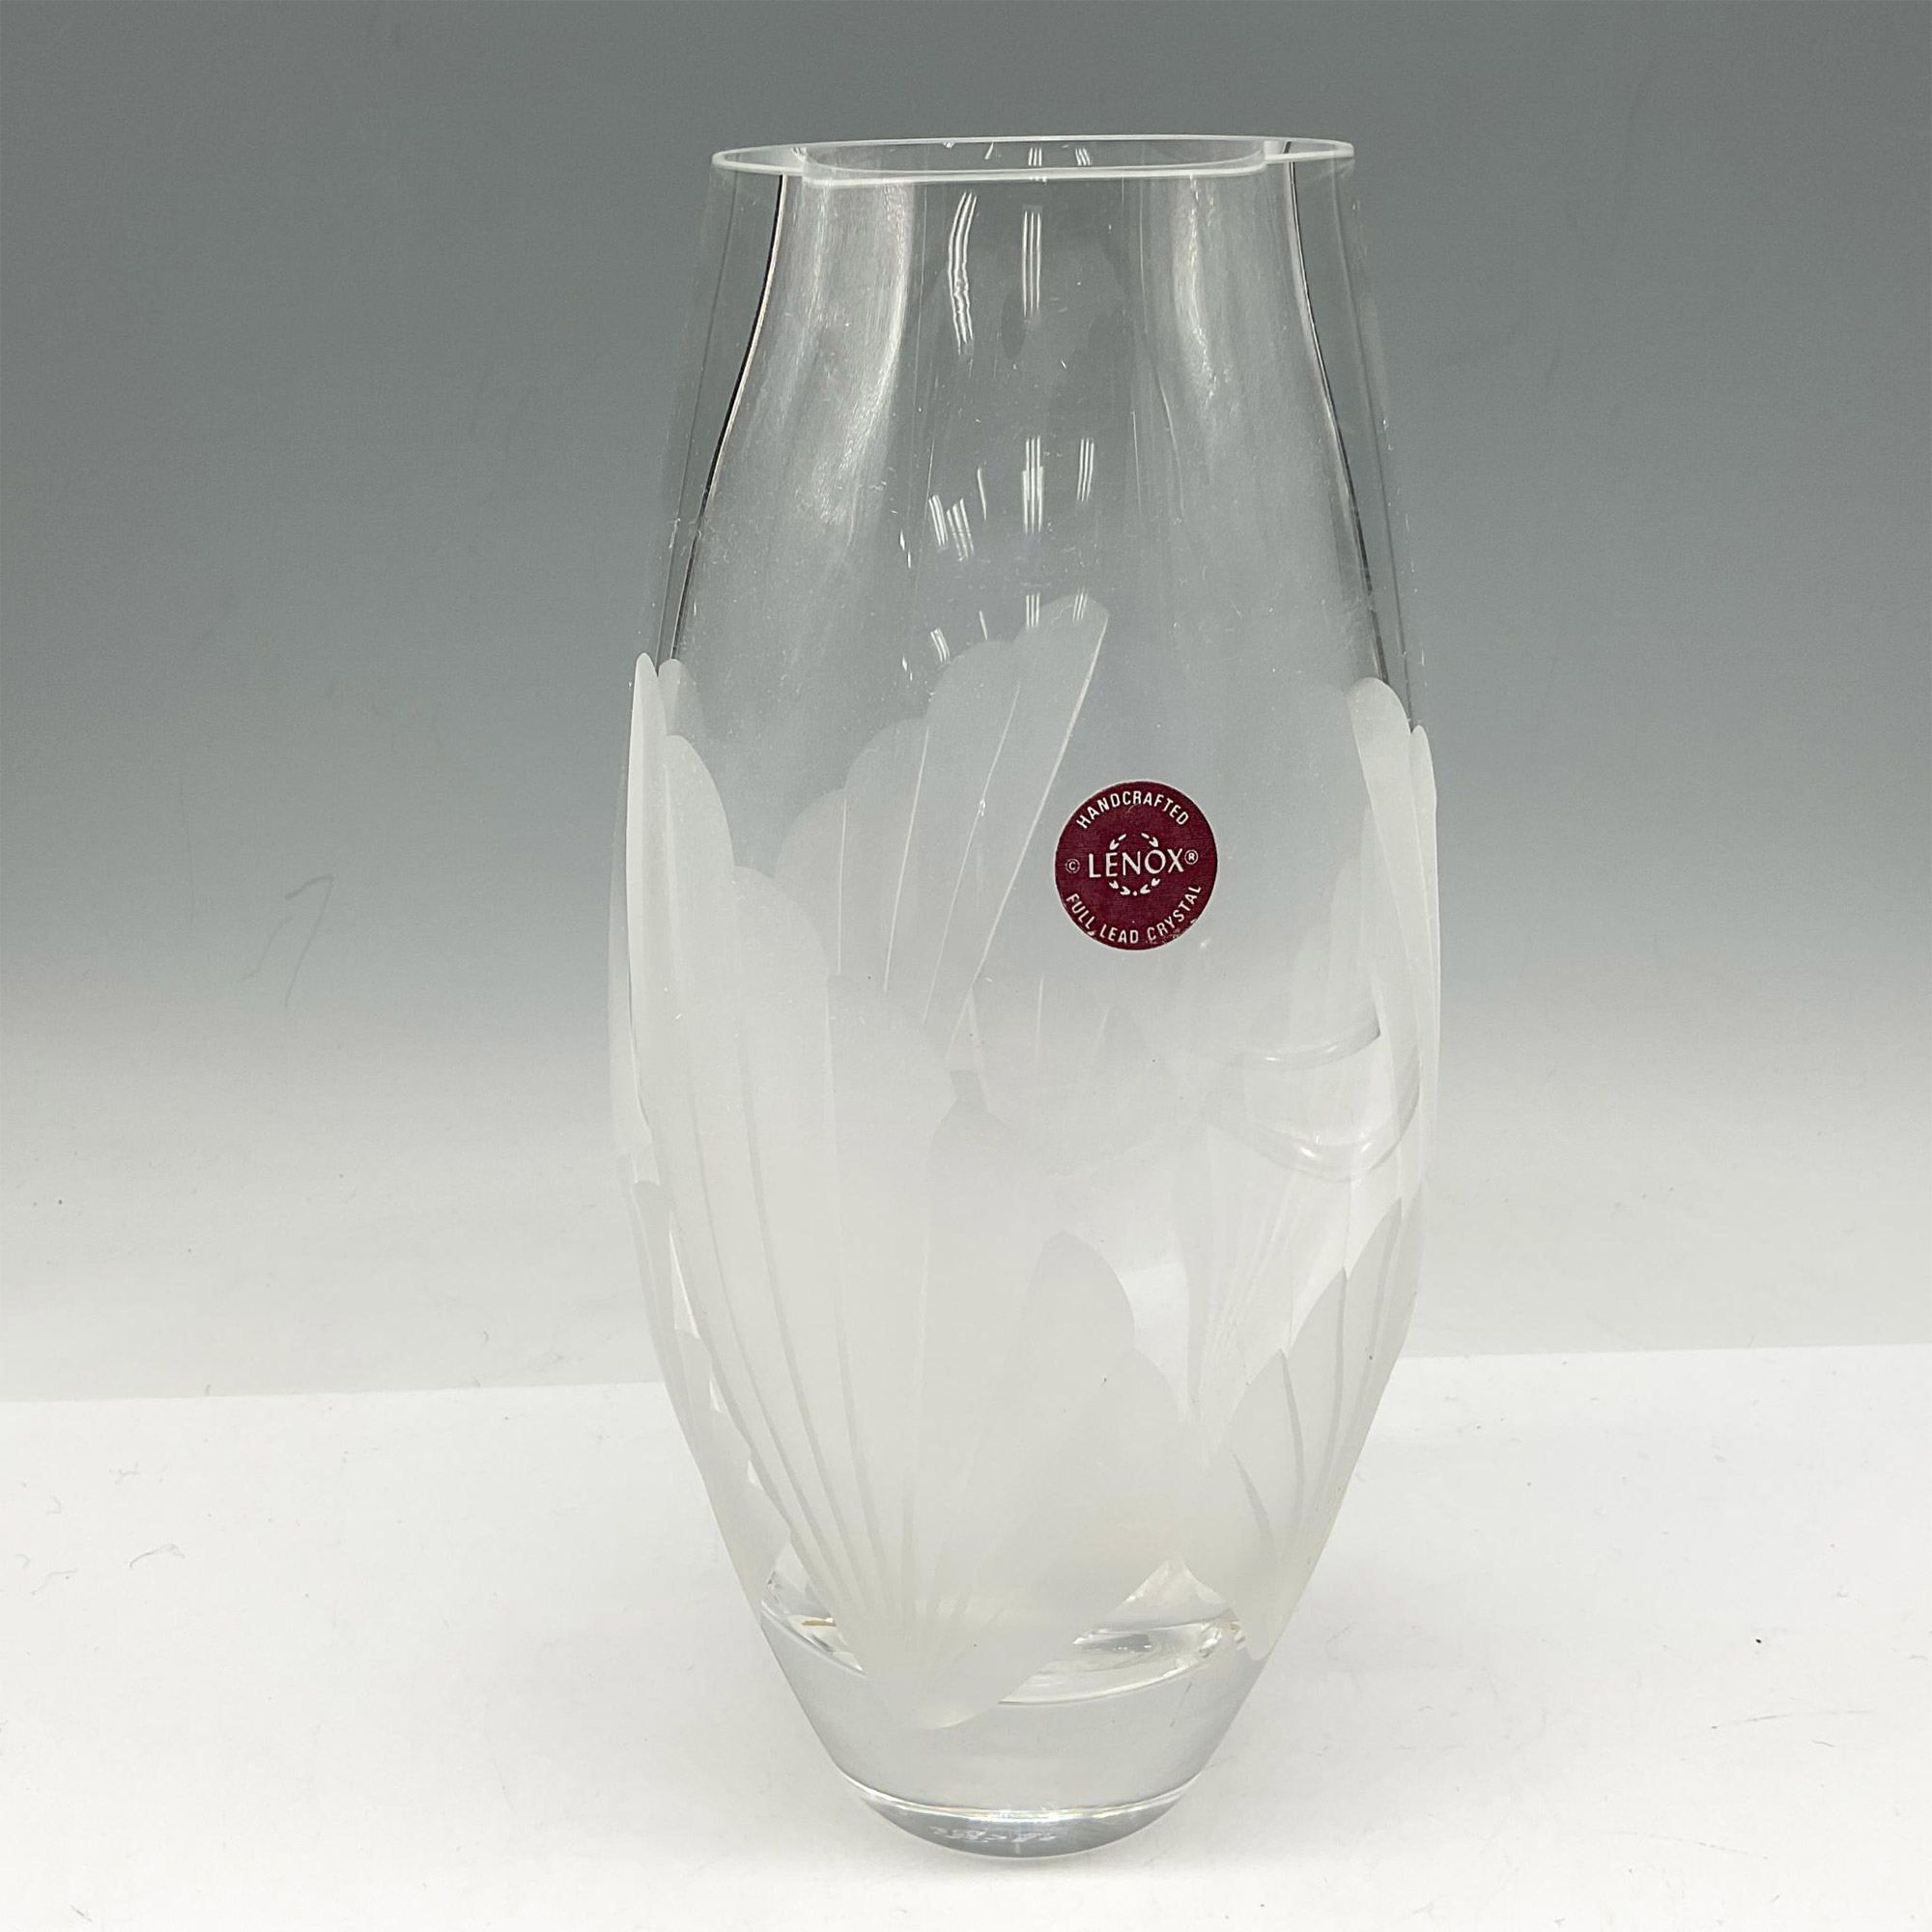 Lenox Handcrafted Crystal Vase - Image 3 of 4